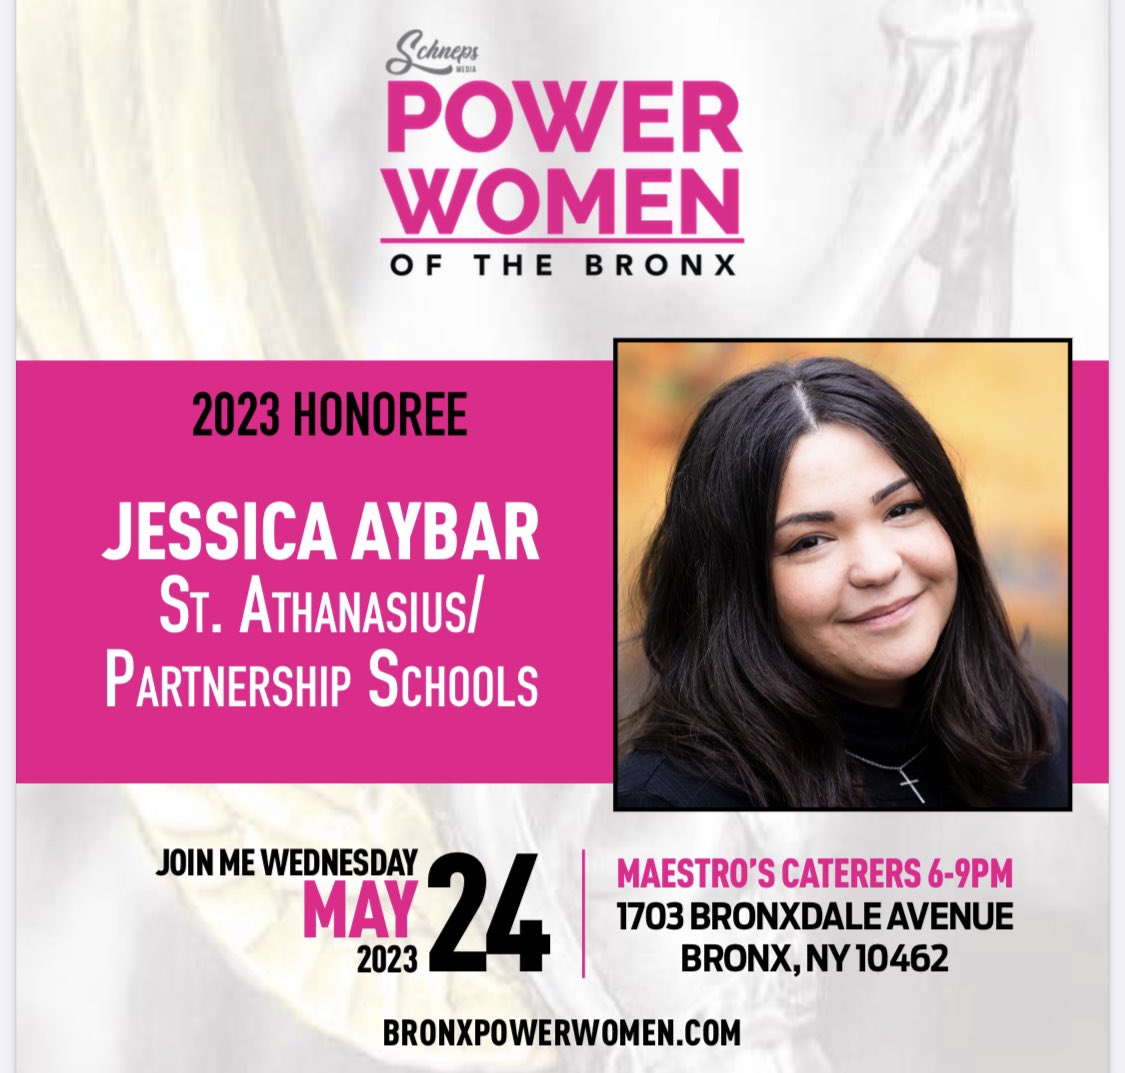 Humbled&excited to be honored with 39 other women leaders in the BX on 5/24 by #schnepsmedia. Power women of the BX honors “fearless women who make the Bx a vibrant place to live, work, and do business.” Full circle moment for this BX girl 🥹@PartnershipPost @StAthanasiusBX